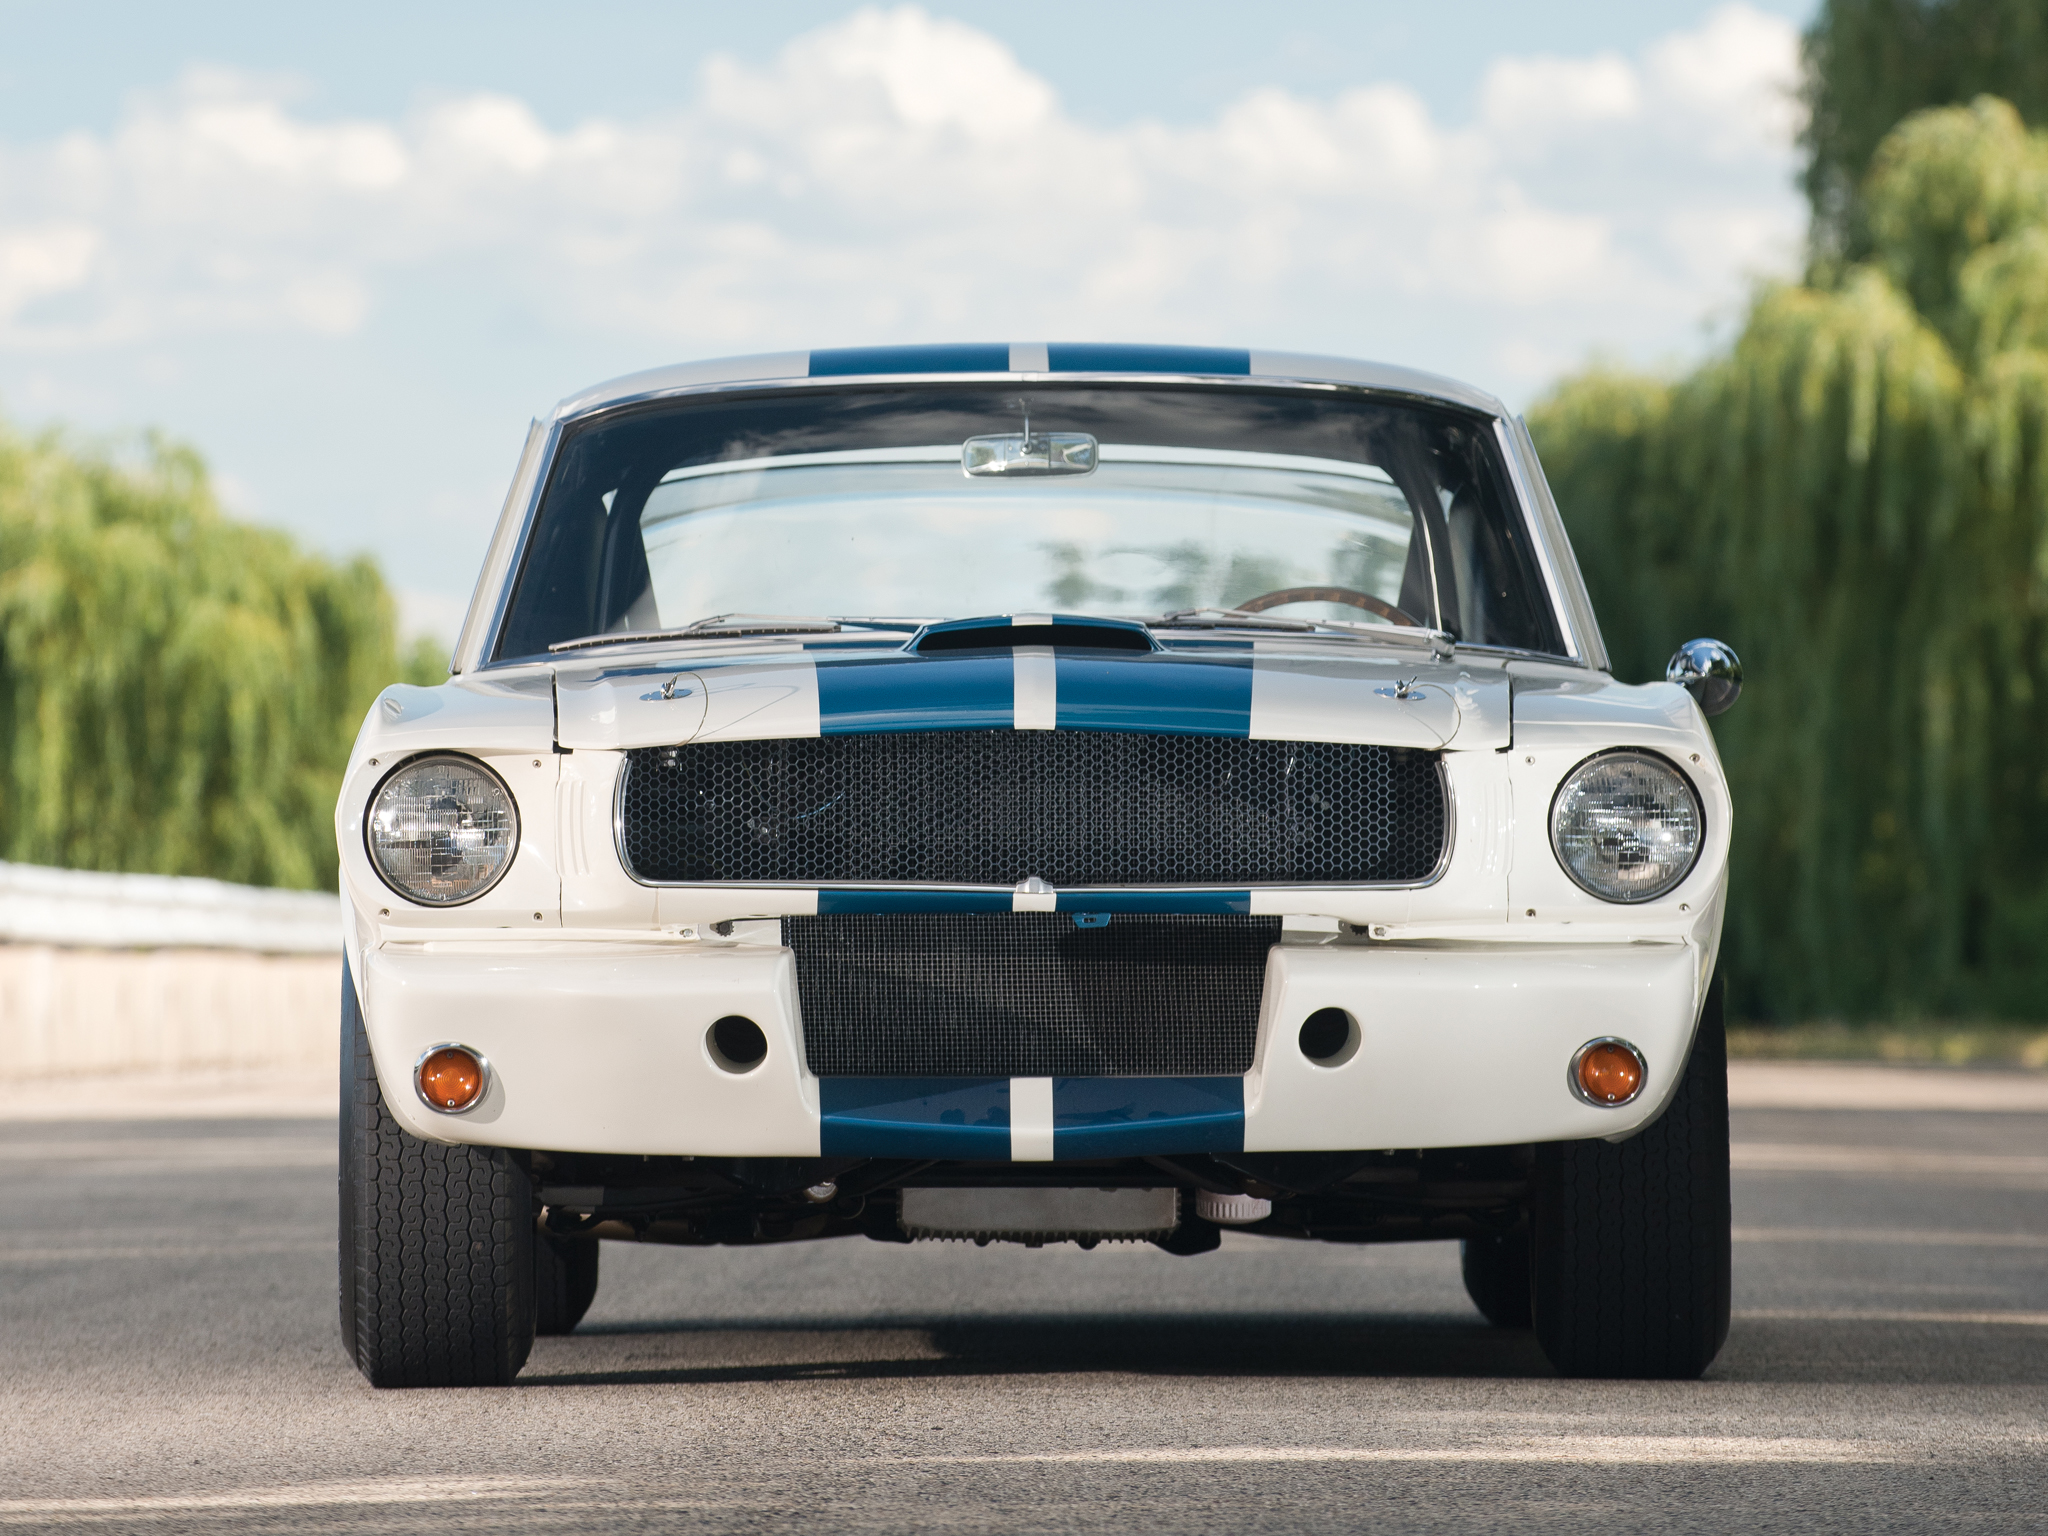 1965, Shelby, Gt350r, Ford, Mustang, Classic, Muscle, Race, Racing Wallpaper